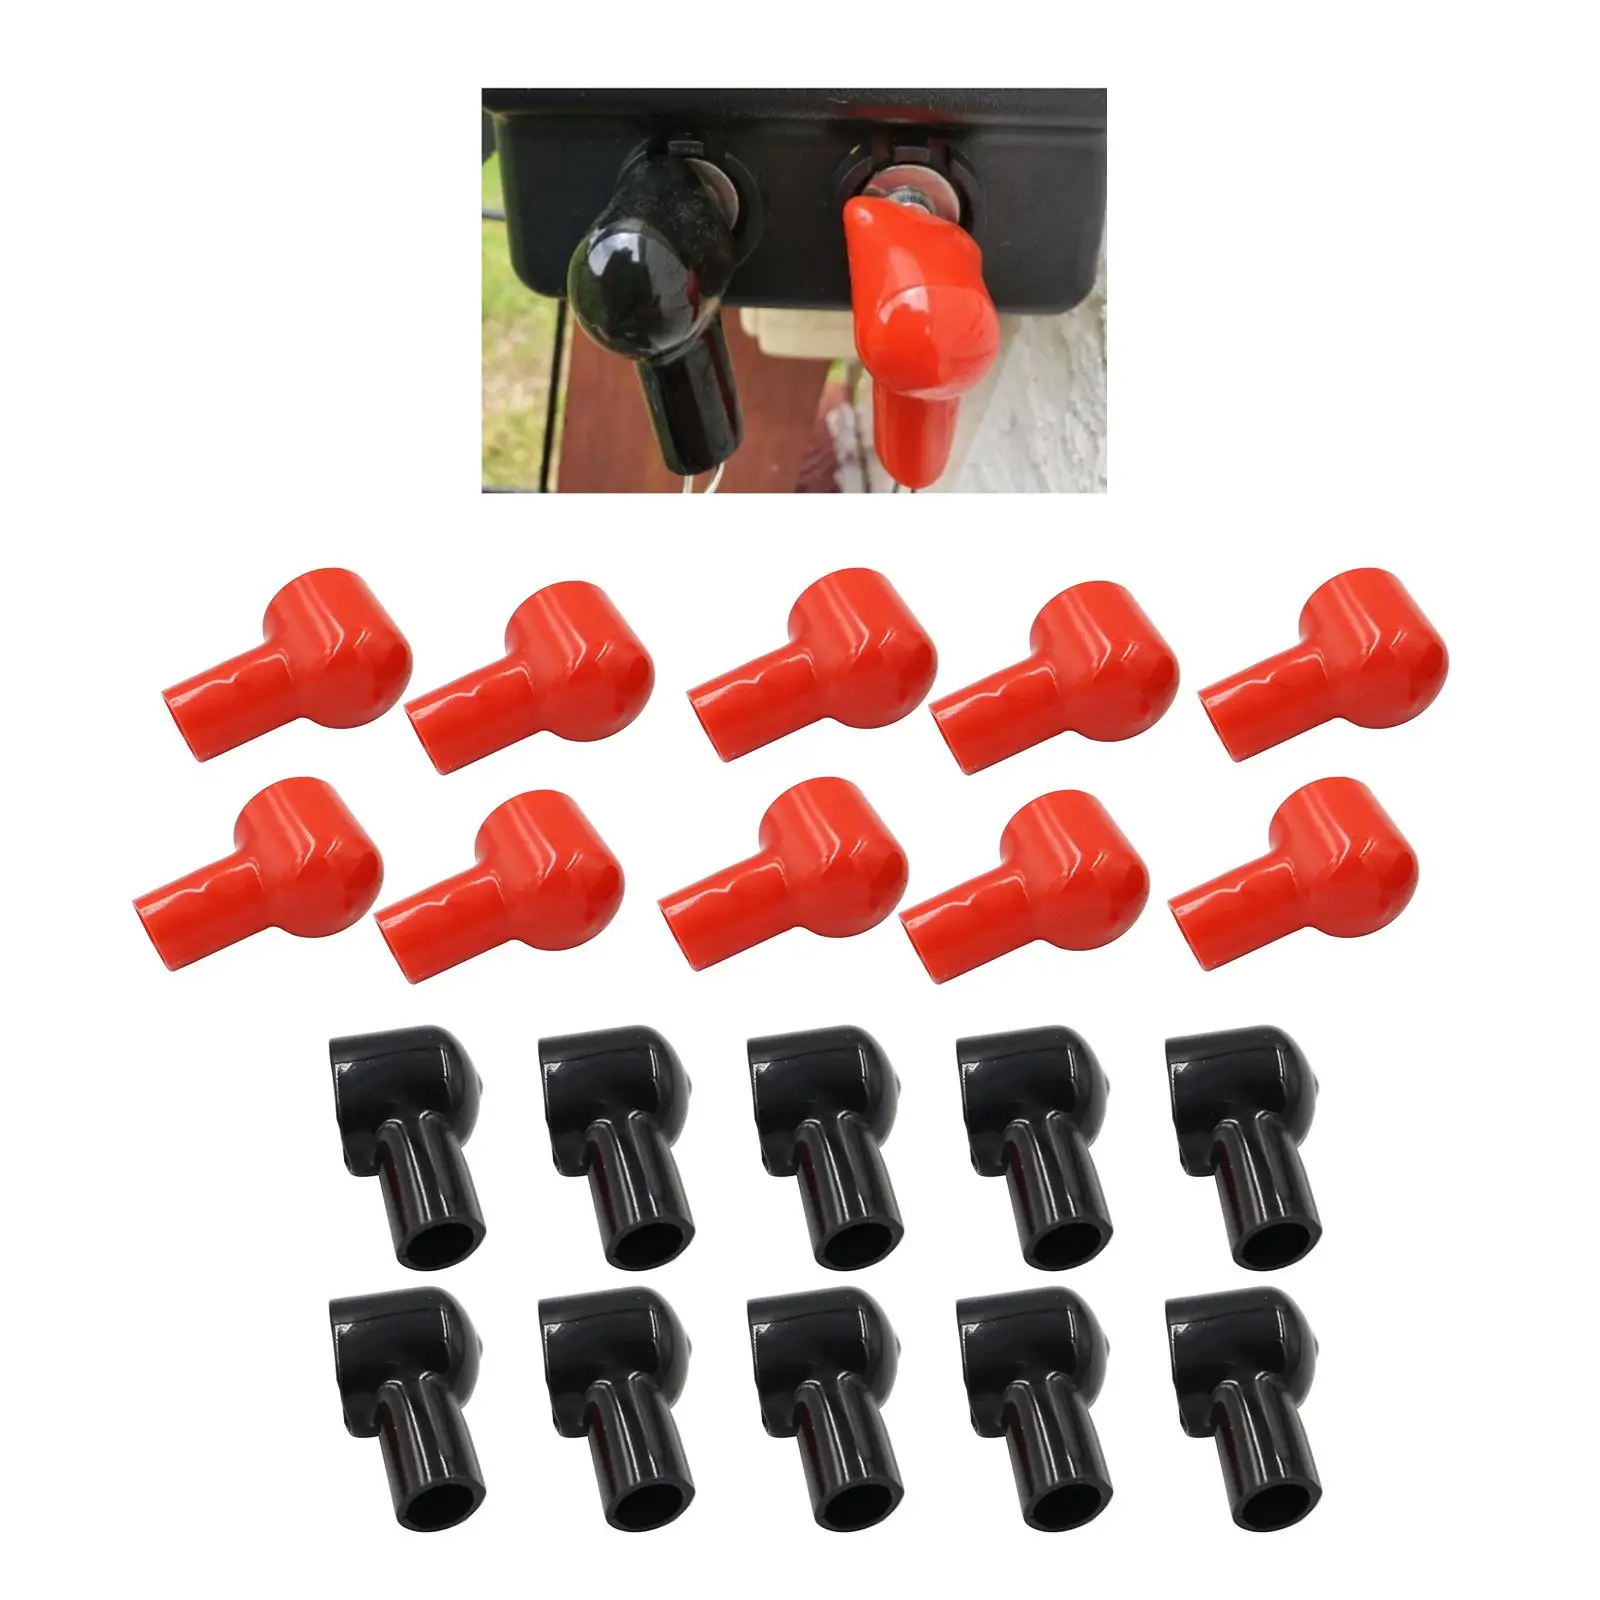 20 Pieces Red and Black Battery Terminal Cover, Flexible  Insulating Cover for Boat Automotive Vehicle Commercial Accessories